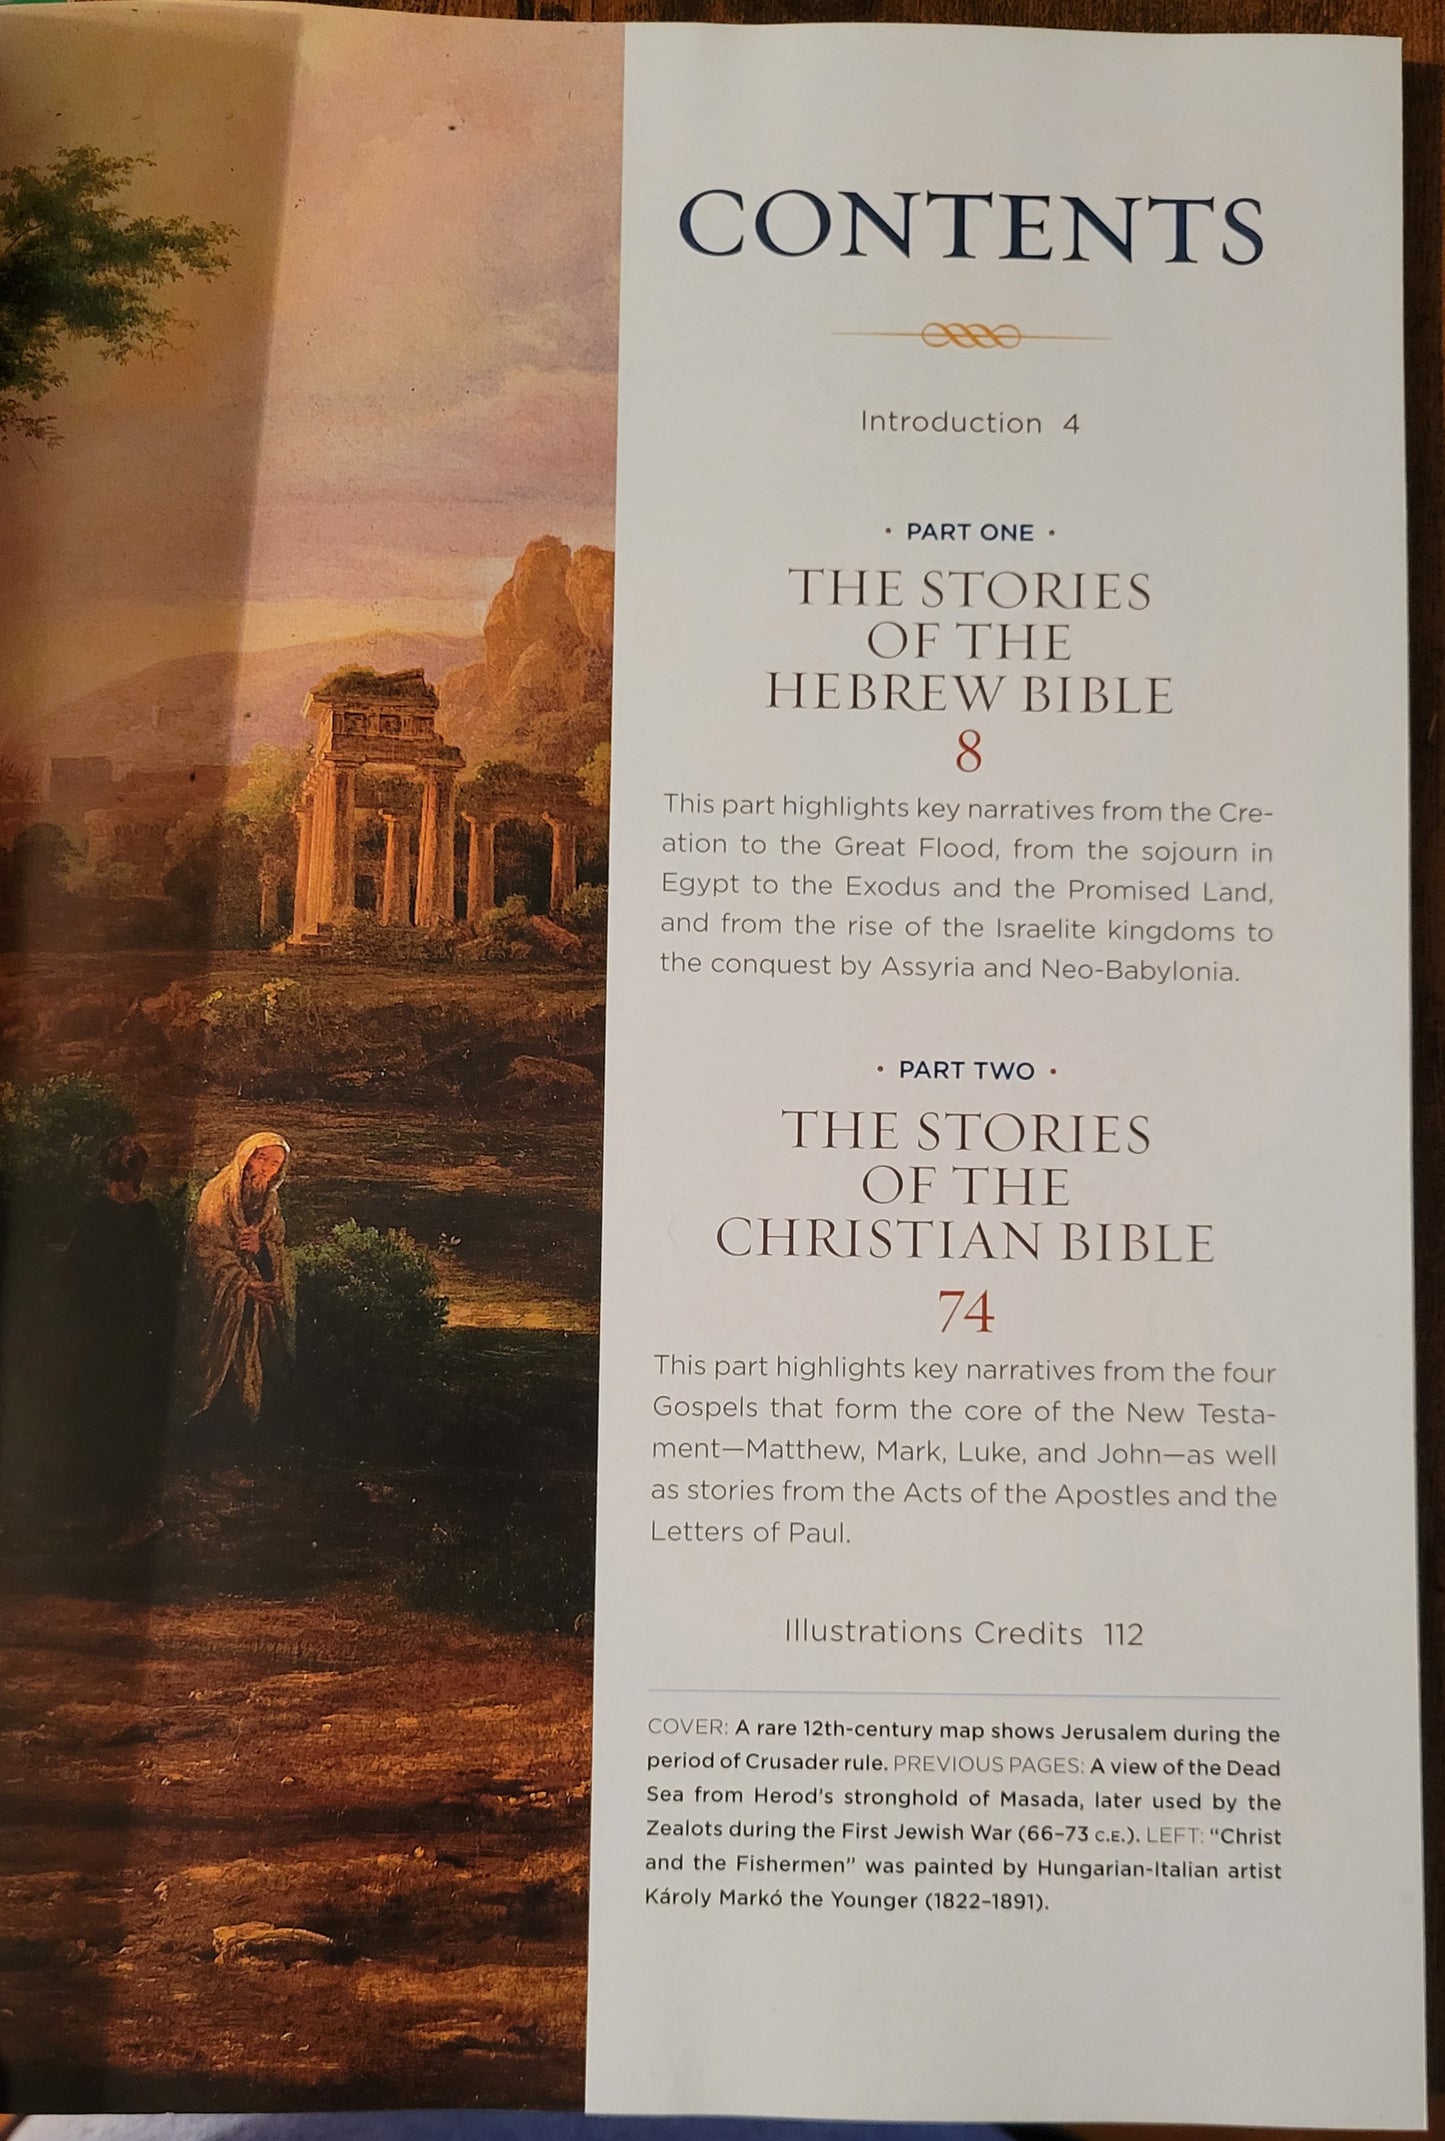 National Geographic special edition "Atlas of the Bible: Exploring Holy Lands", with 17 maps. View of table of contents.